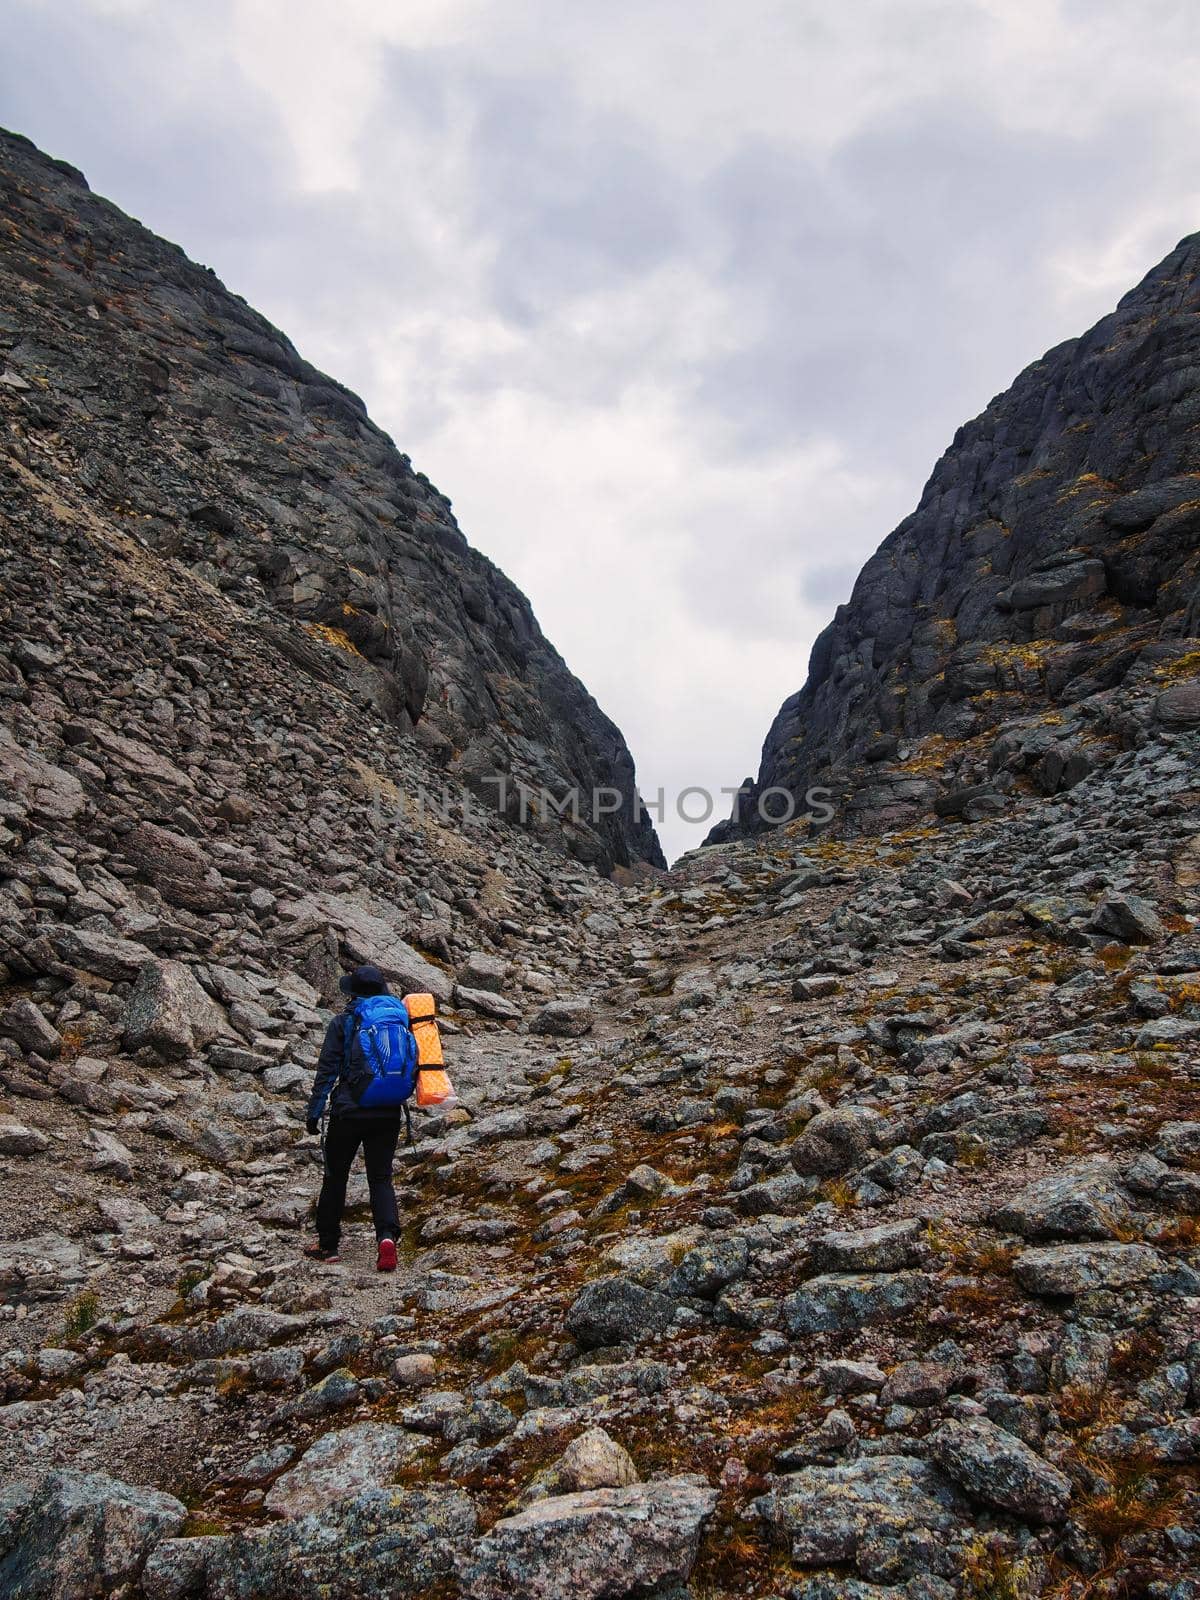 A young woman tourist with a backpack goes through a lifeless rocky pass.